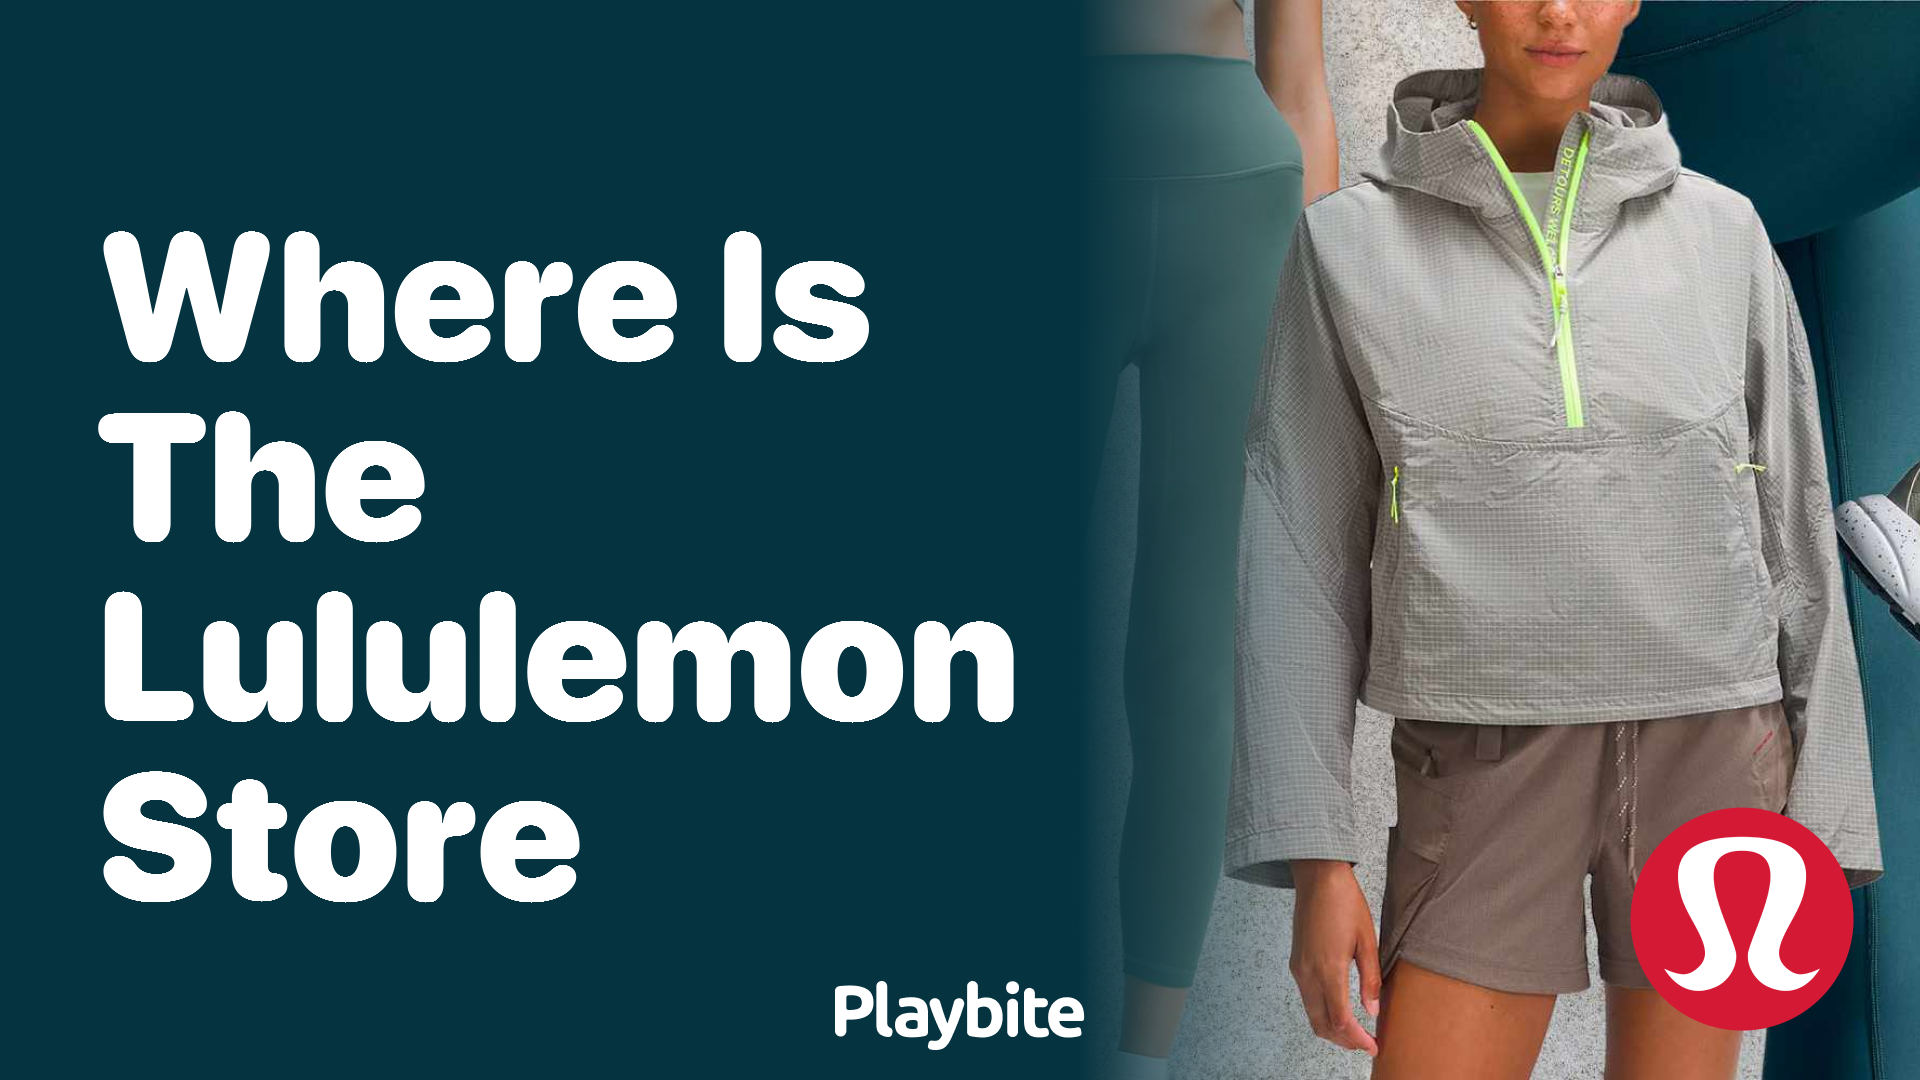 Where Is the Closest Lululemon Store to You? - Playbite